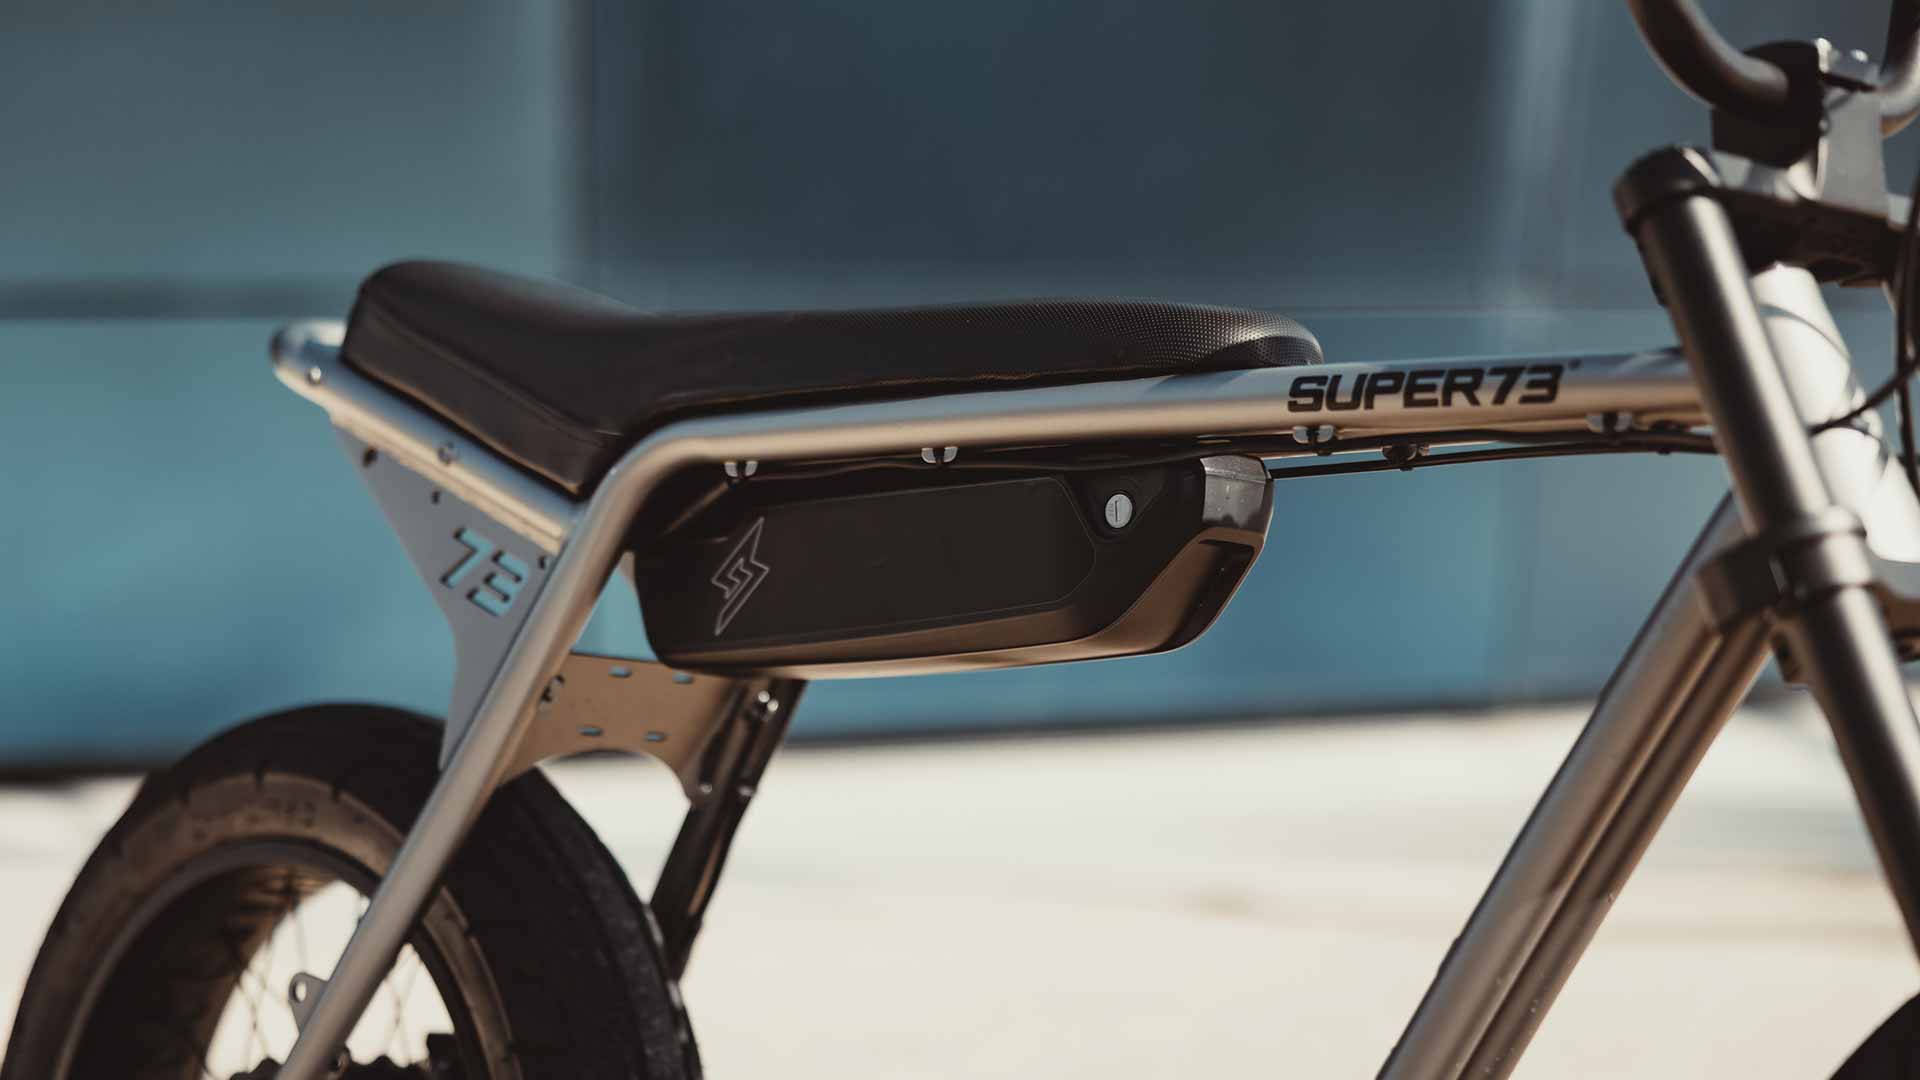 Closeup of the Super73-ZX ebike removable battery